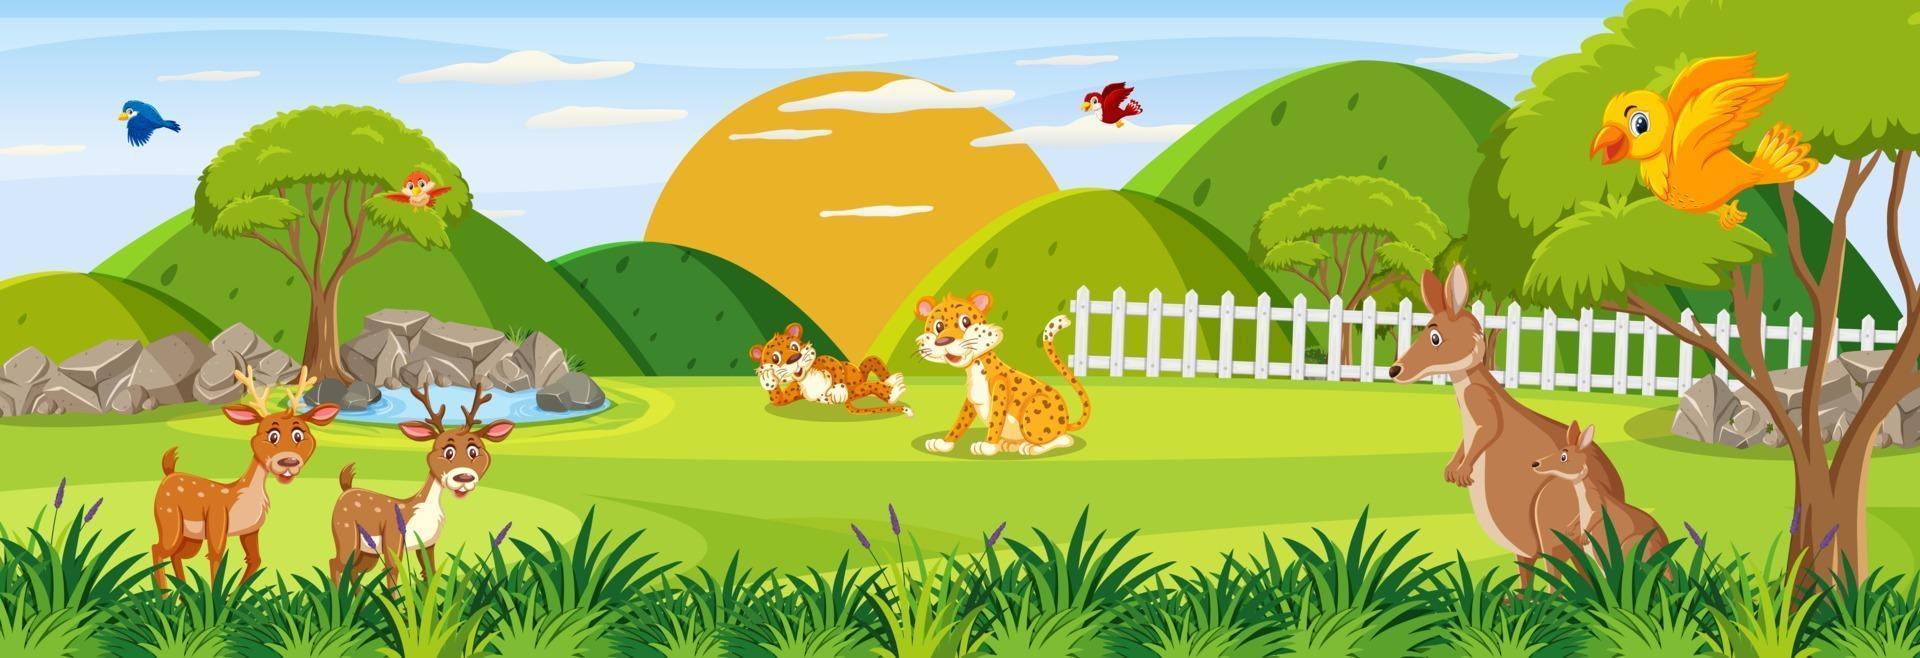 Panorama landscape scene with various wild animals in the forest vector